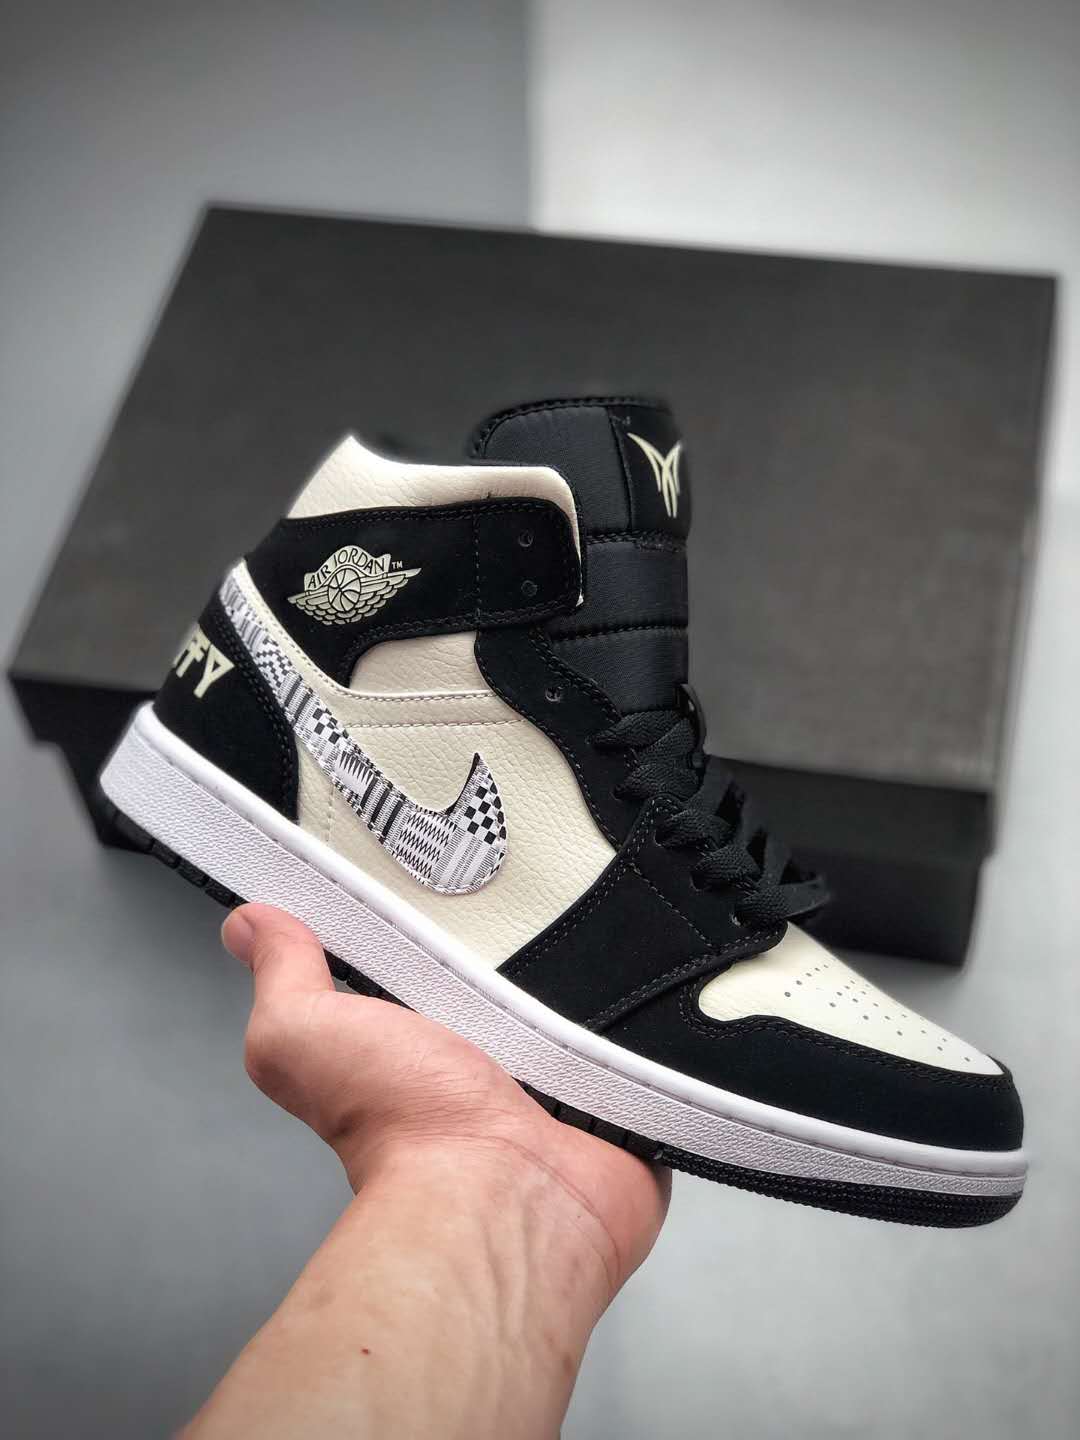 Air Jordan 1 Mid Melo SE 'Equality' 852542-010 - Stylish and Symbolic Sneakers